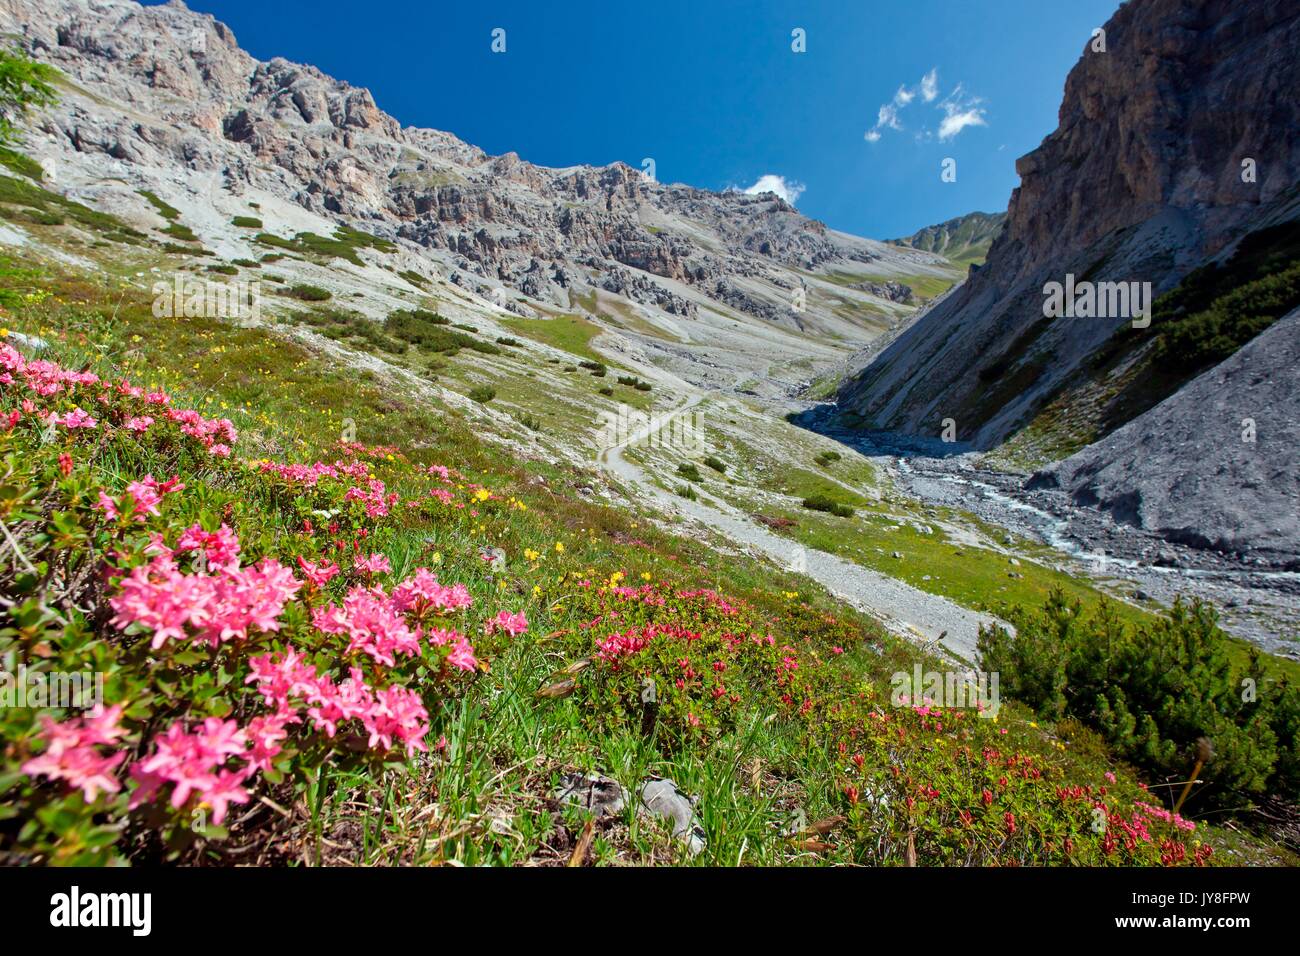 Rhododendron blooming in the wild Valle della Forcola, Valtellina,Lombardy Italy Europe Stock Photo